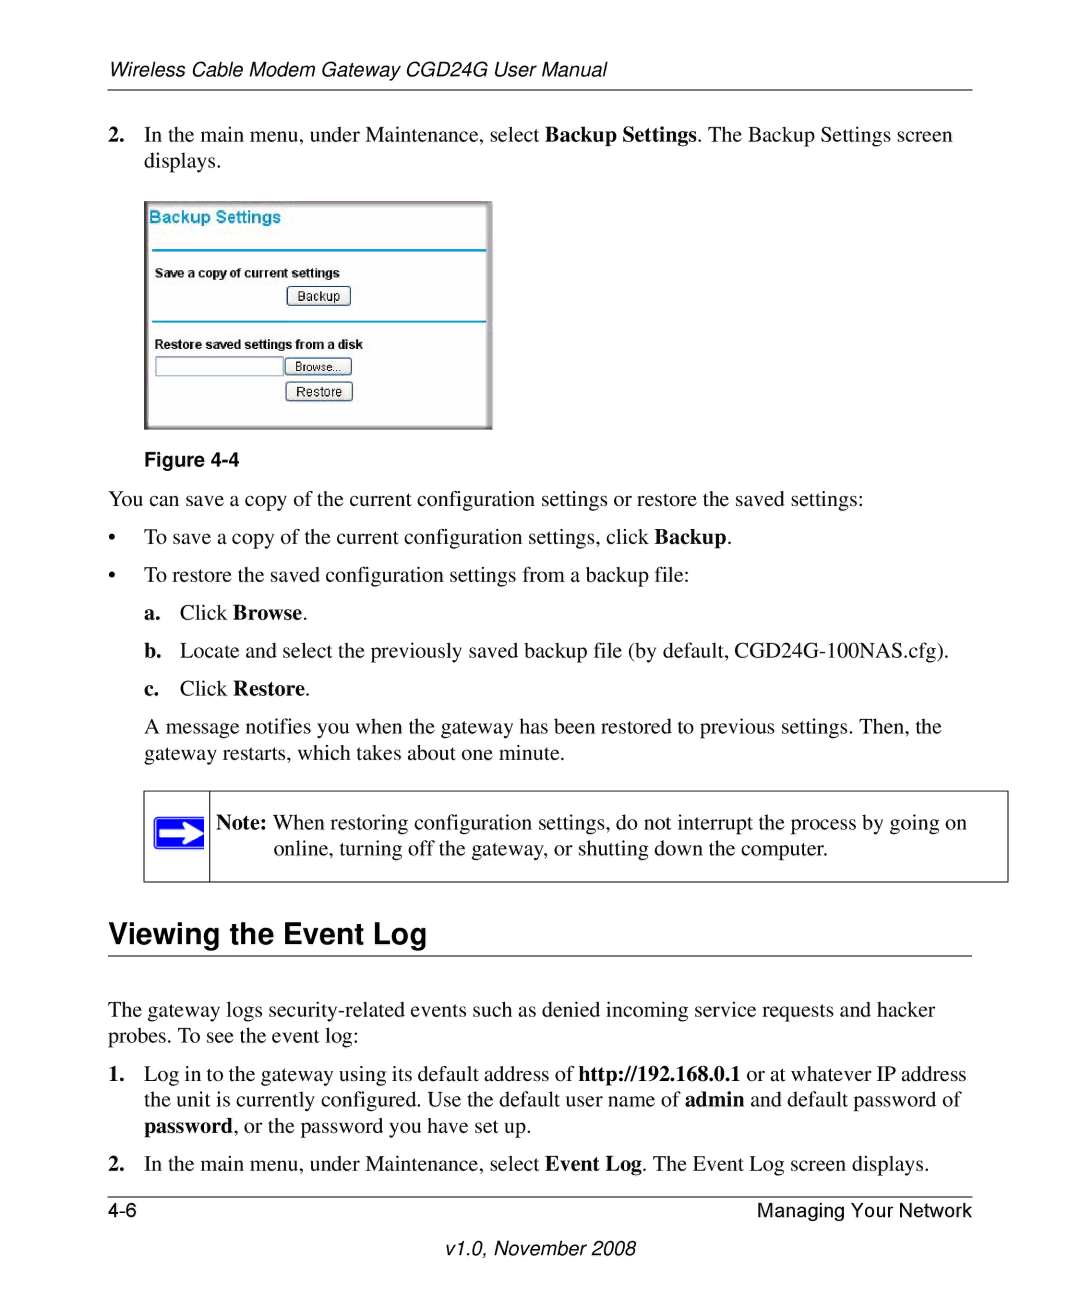 Gateway CGD24G user manual Viewing the Event Log 